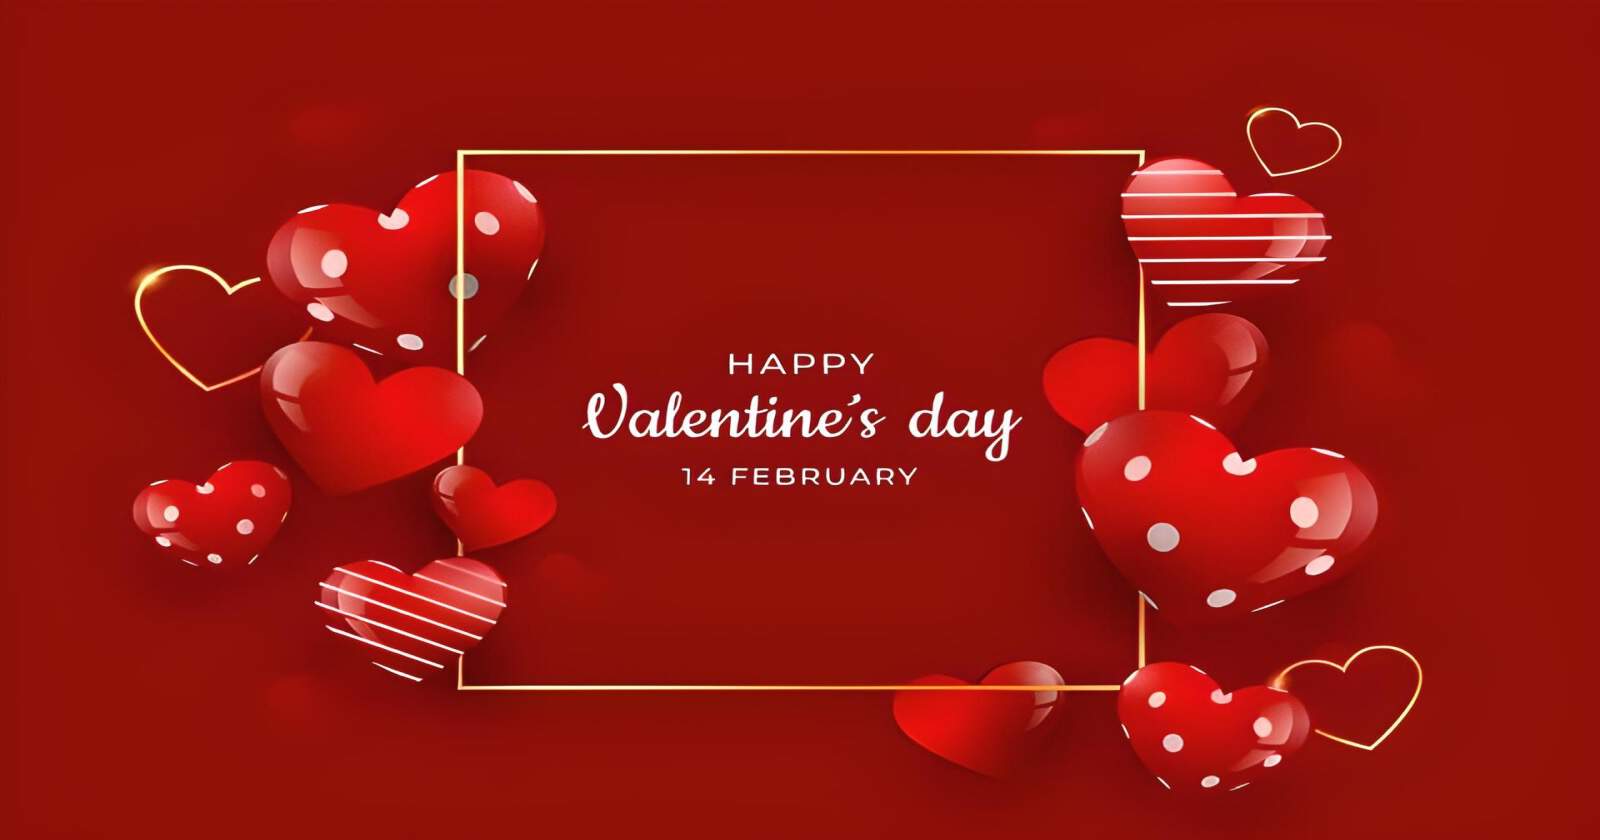 Valentine's Day SMS and Messages